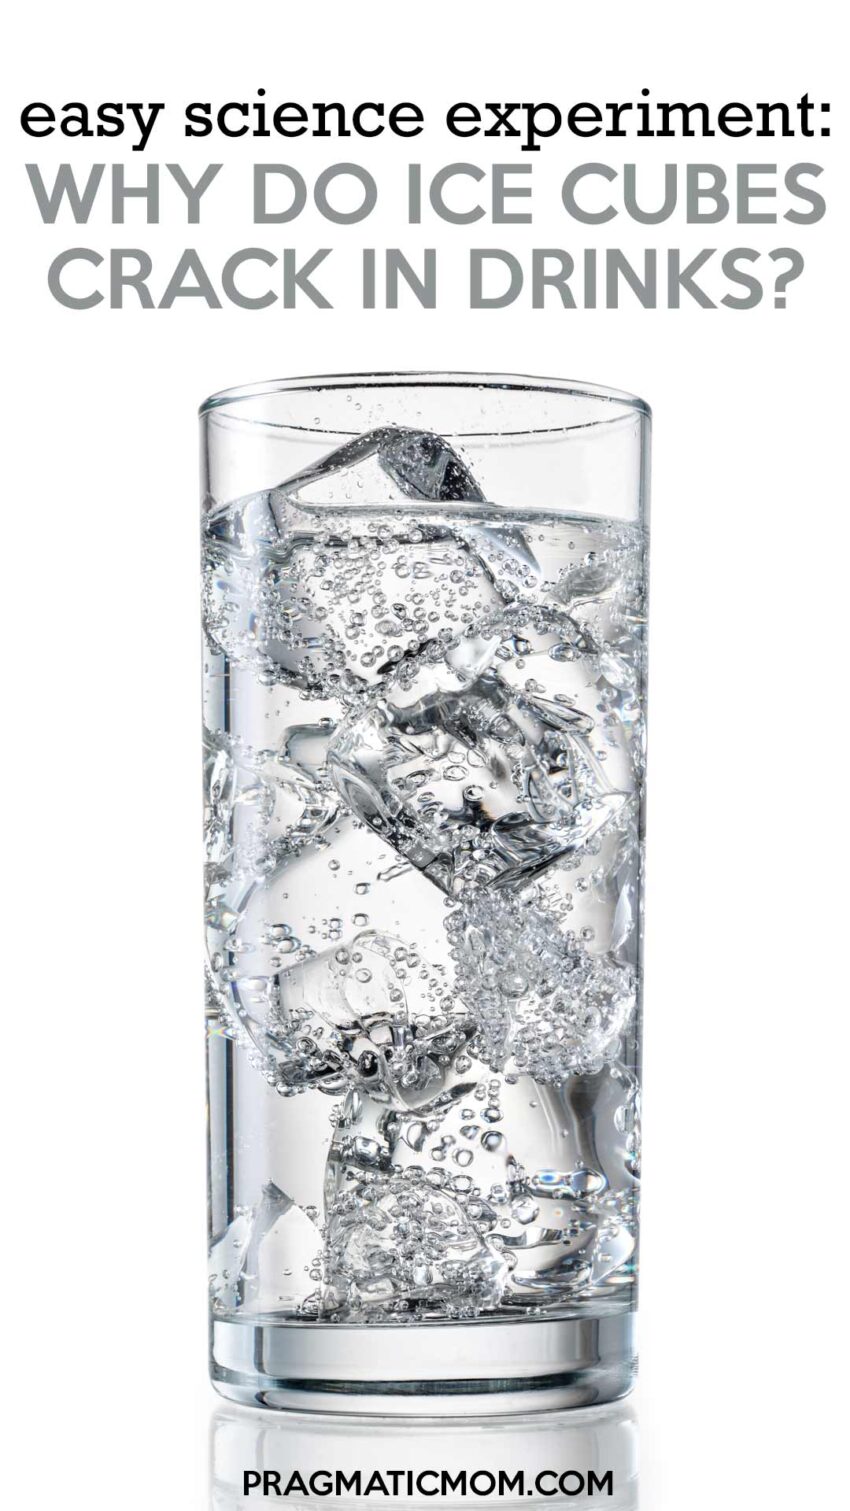 Easy Science Experiment: Why Do Ice Cubes Crack in Drinks?